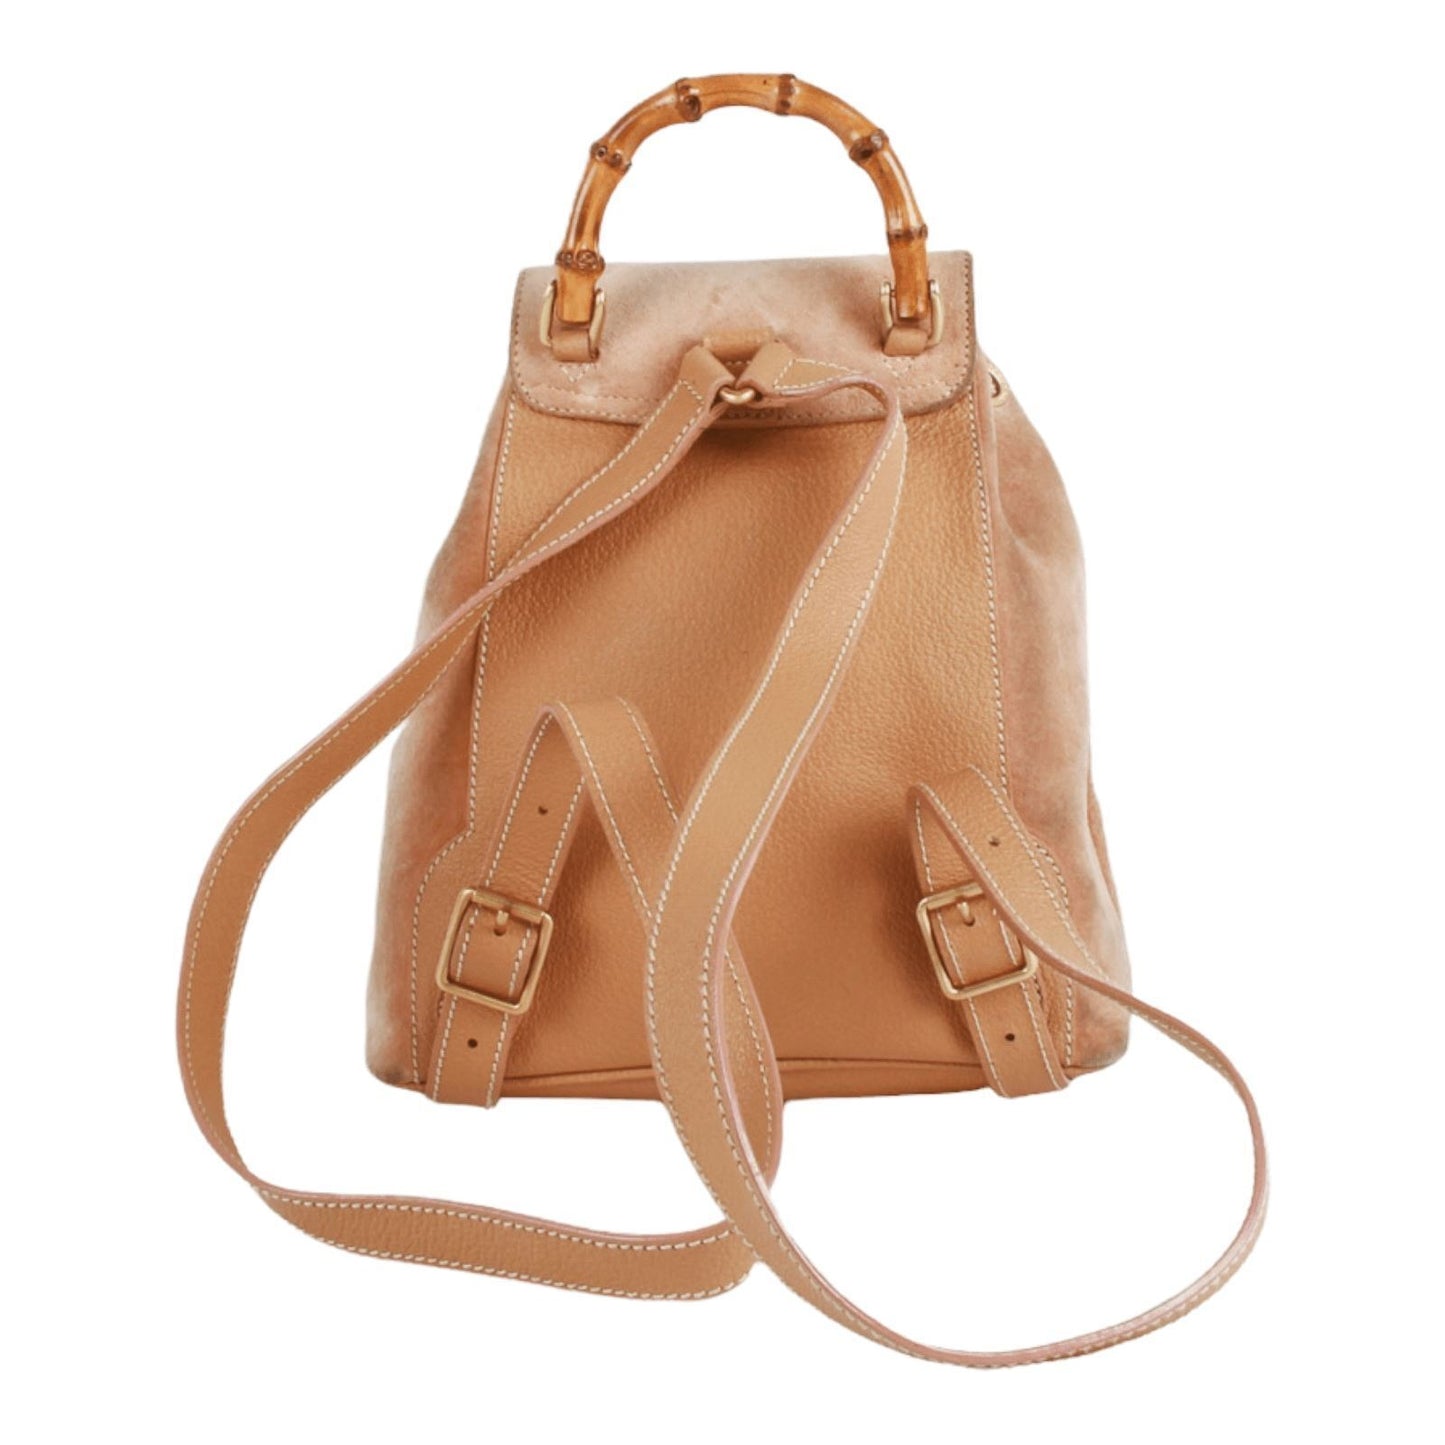 Tom Ford era, Gucci, tan colored, suede and leather, messenger bag/backpack with an exterior pocket, drawstring top, two shoulder strap